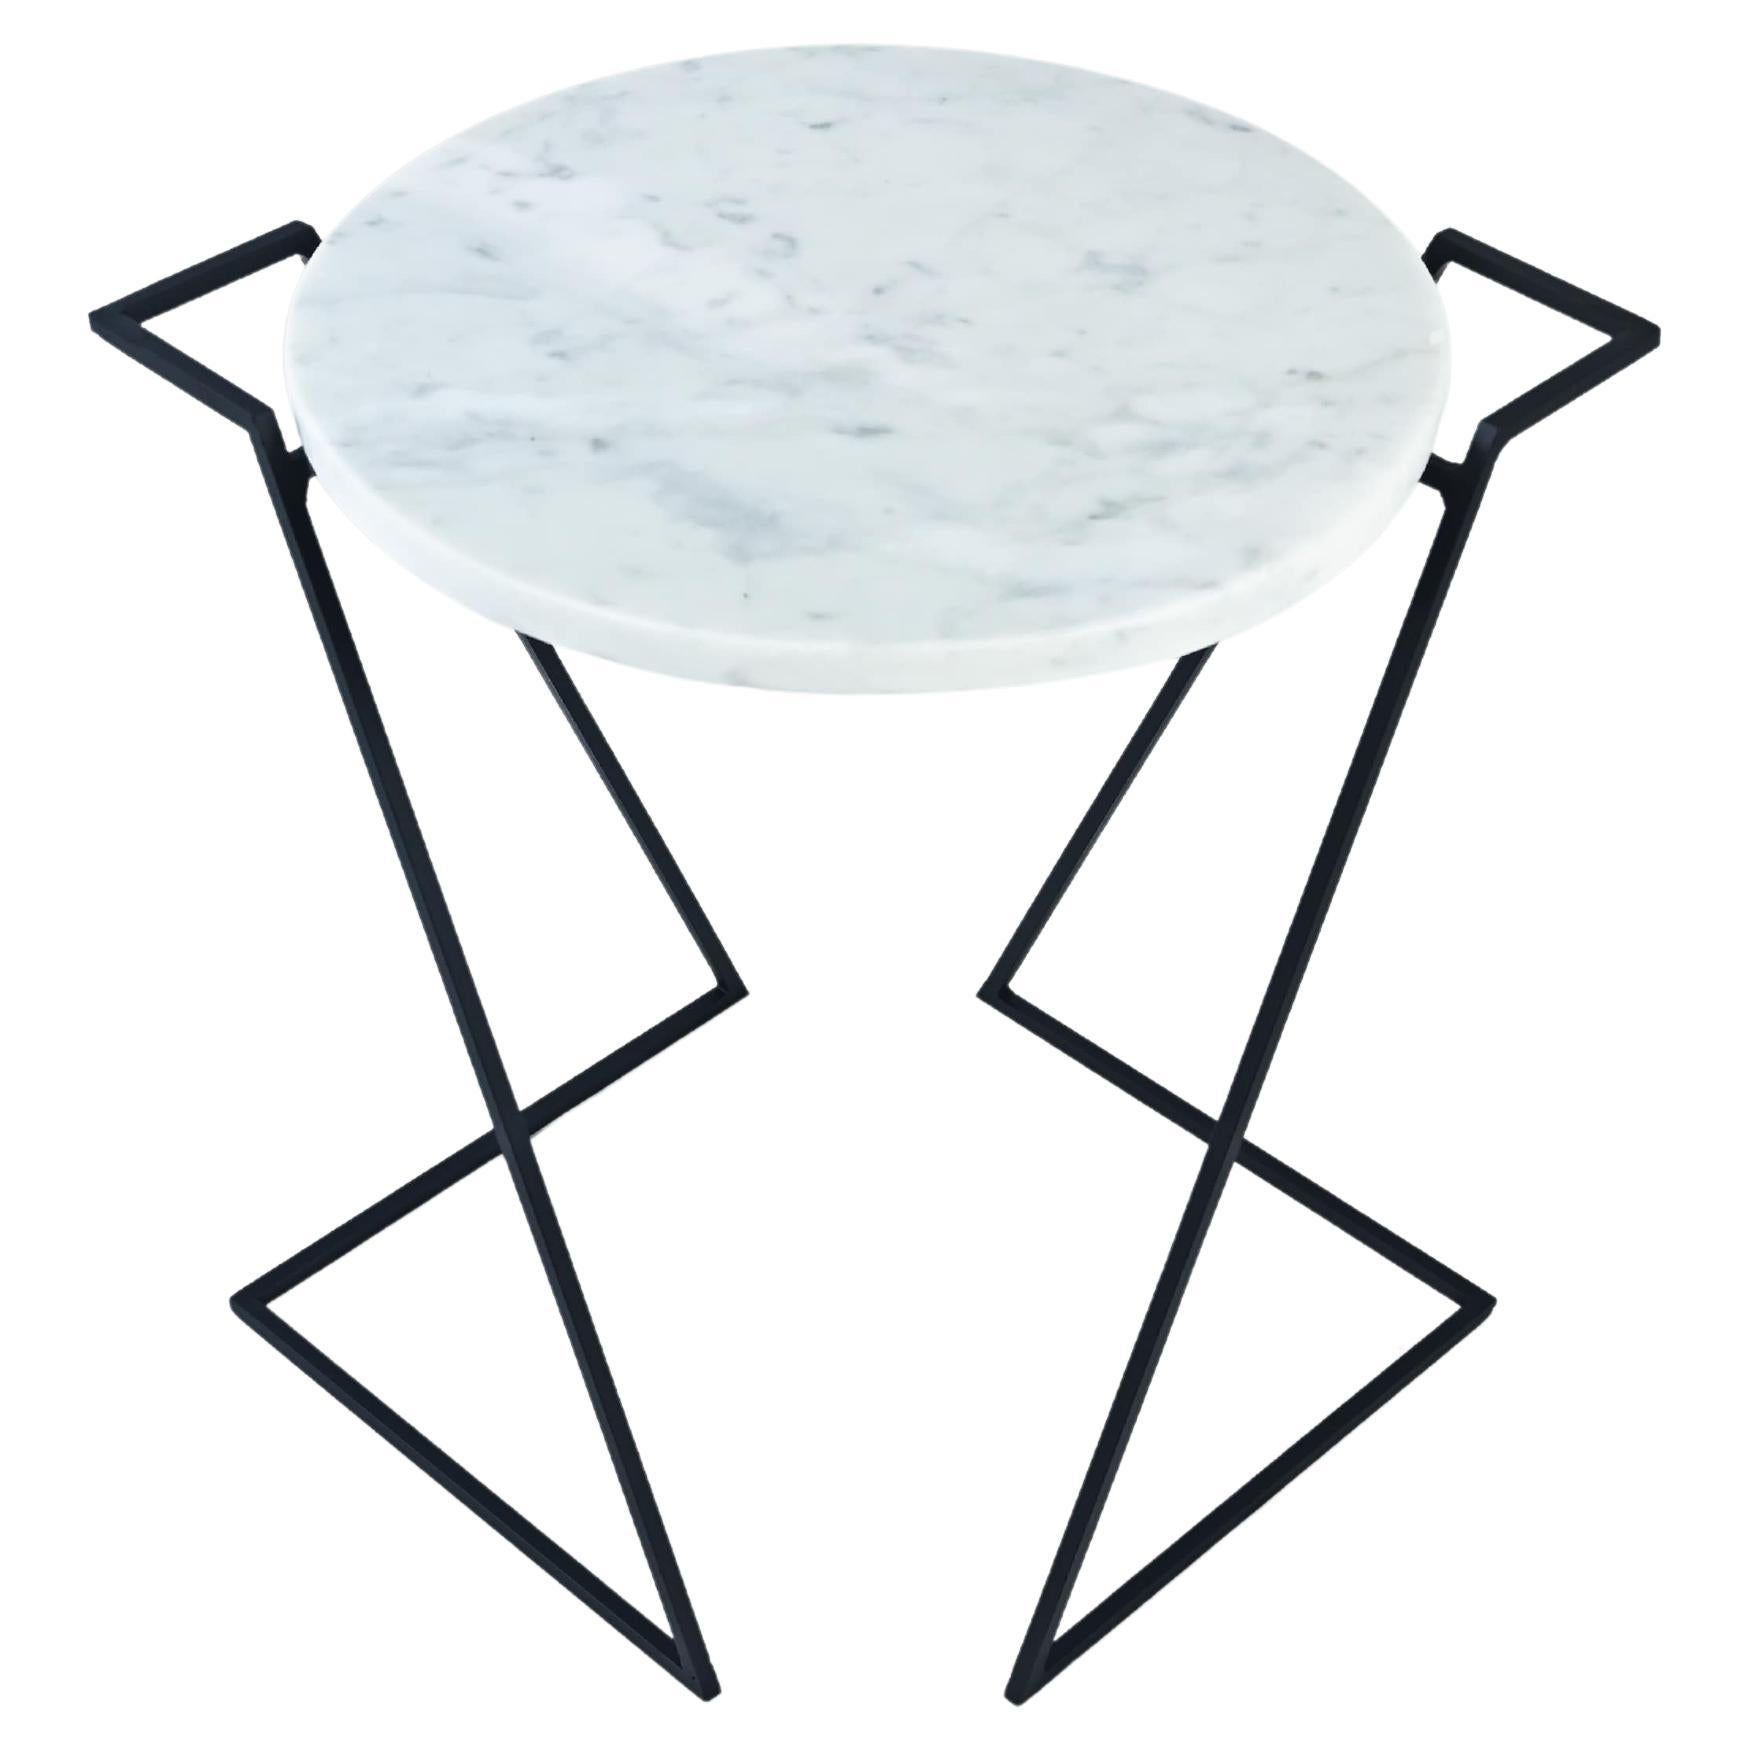 Saturno, Carrara Marble Side Table By DFdesignlab Handmade in Italy